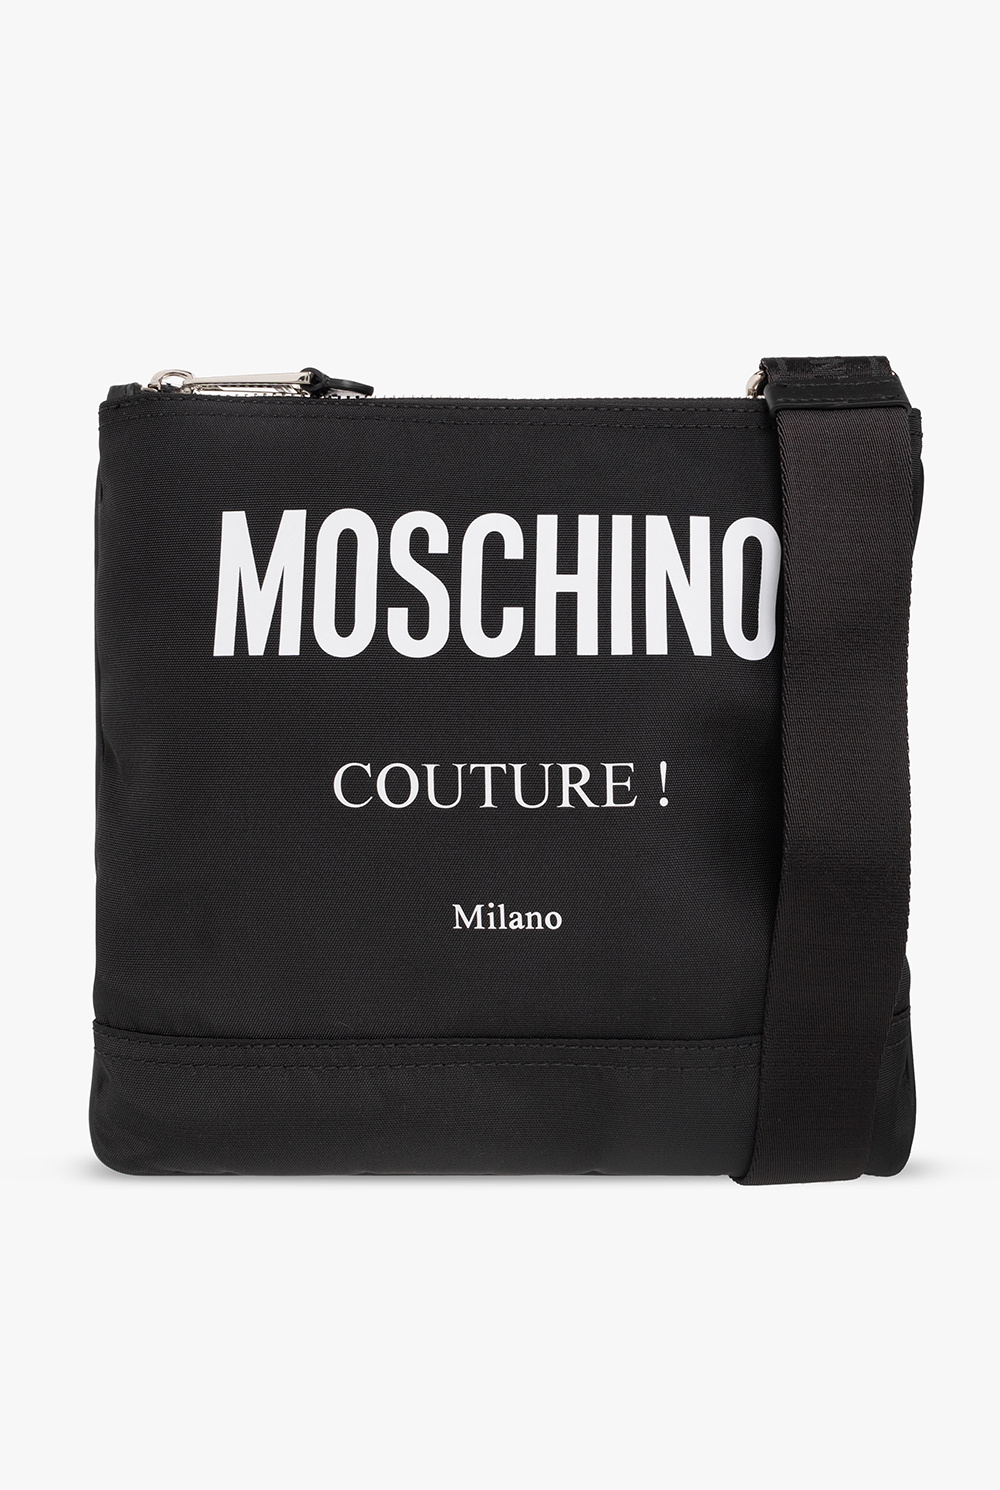 Moschino This navy blue bag is typical of Japanese label